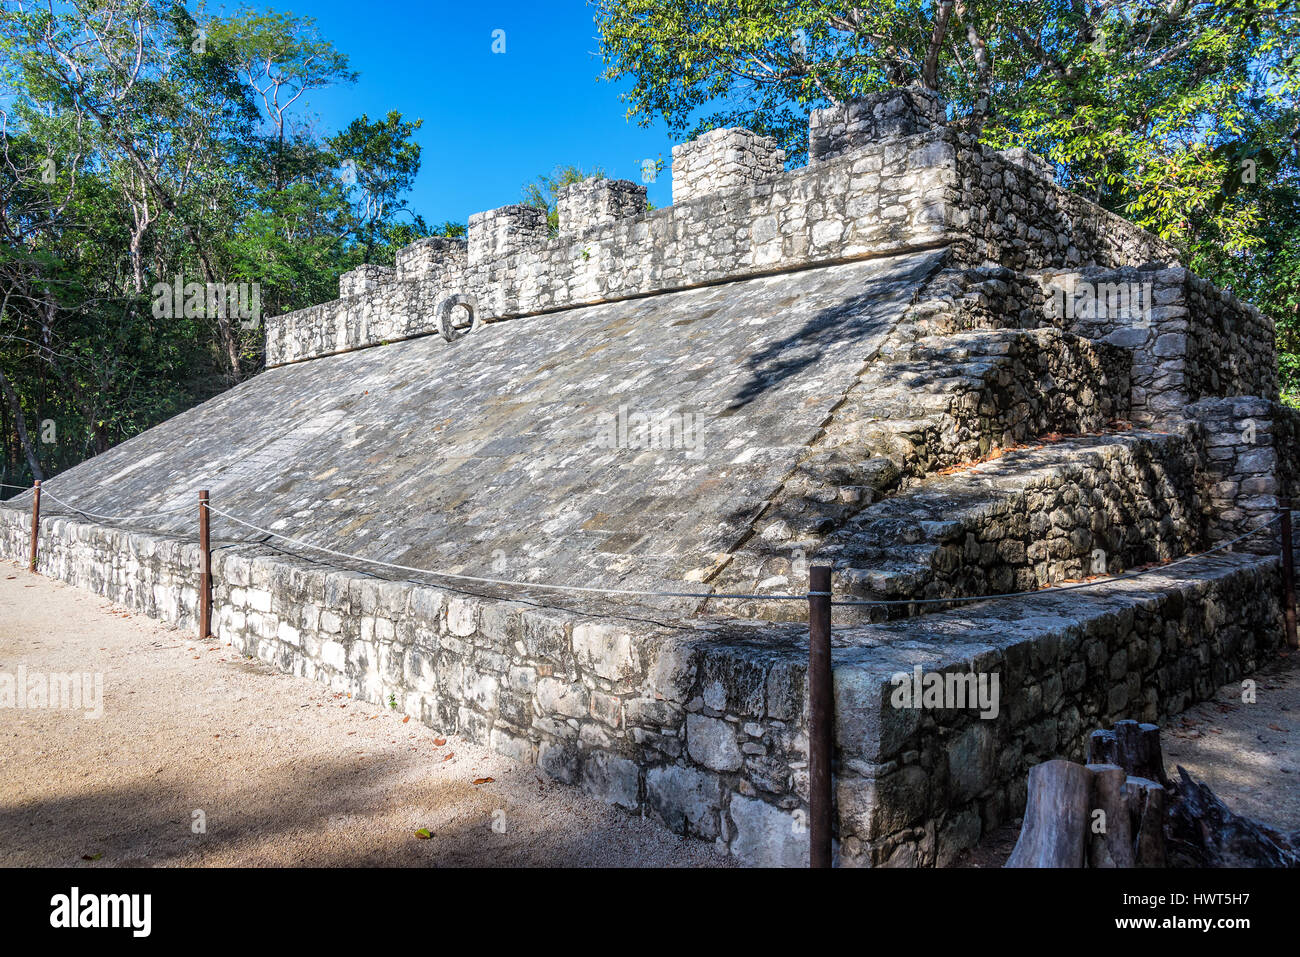 Ruins of the ball court in the Mayan ruins of Coba, Mexico Stock Photo